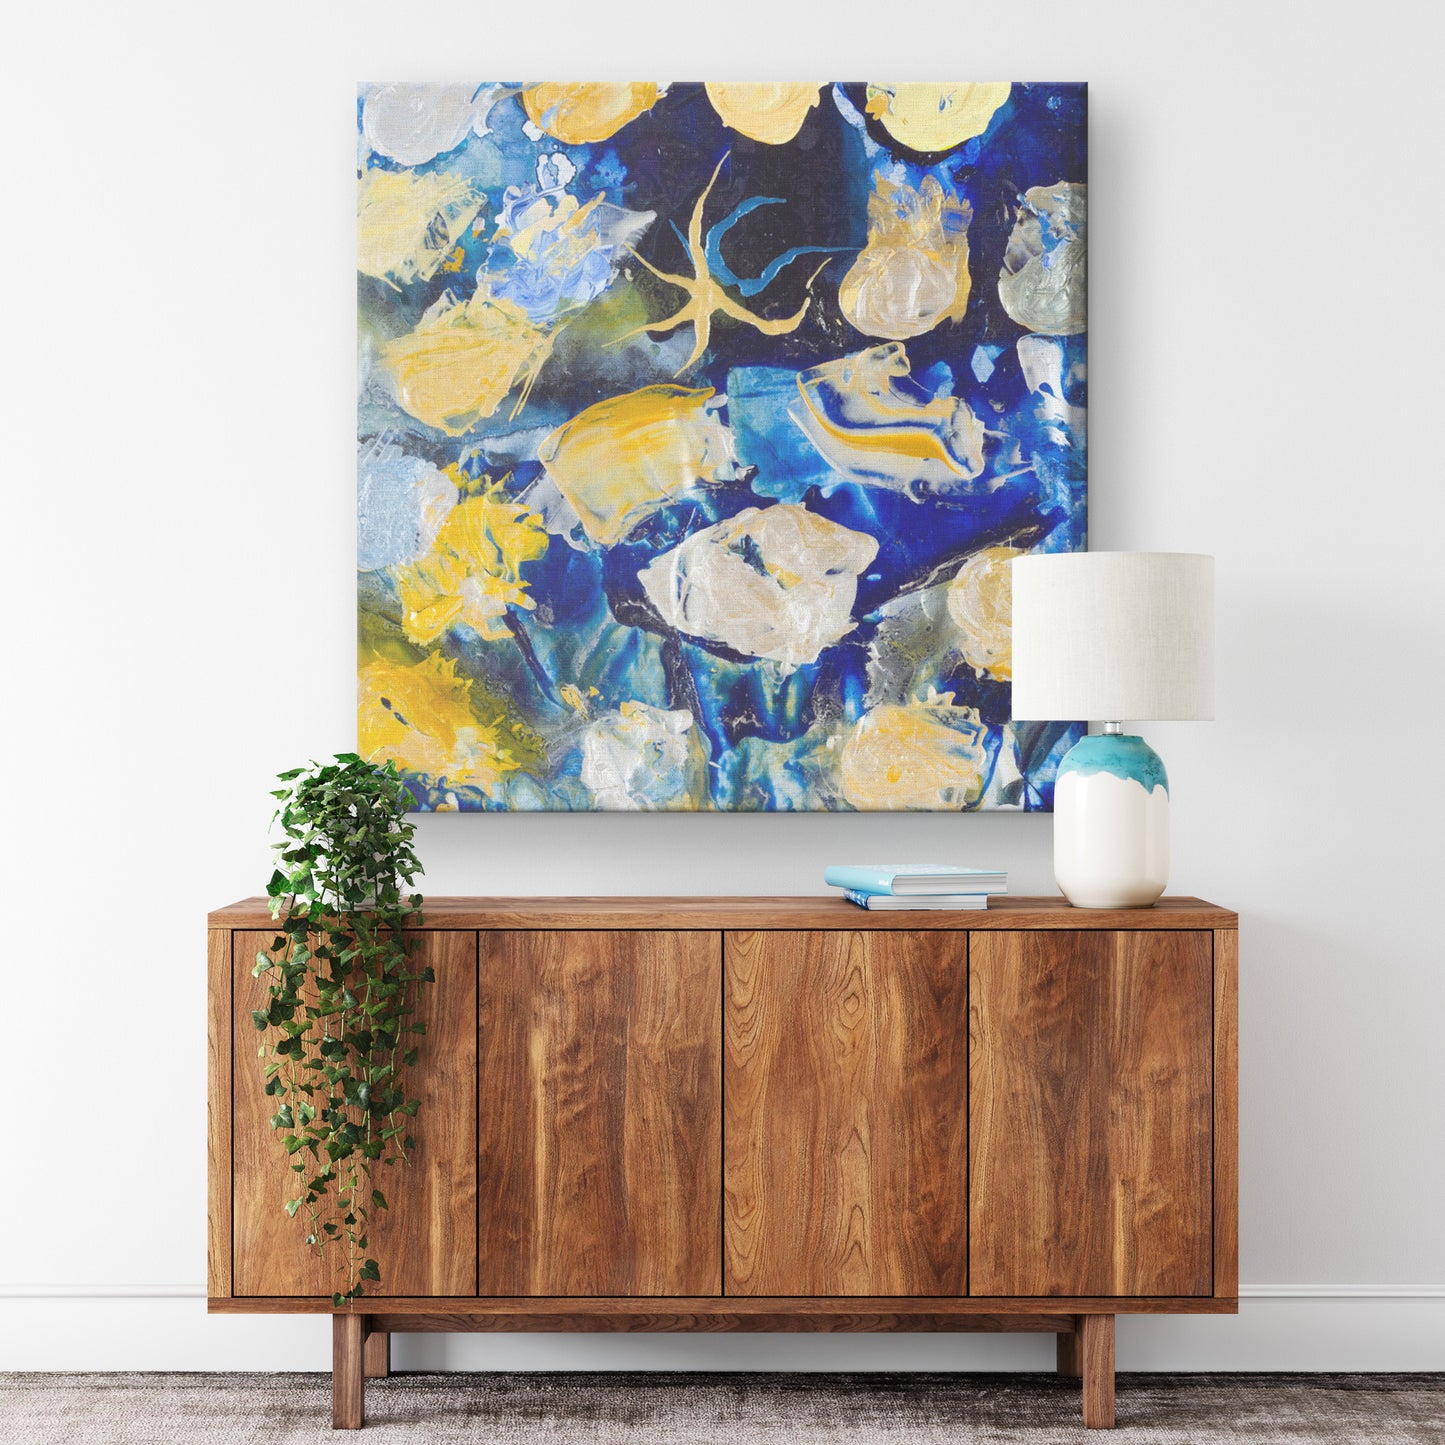 Starry Night inspired art and decor